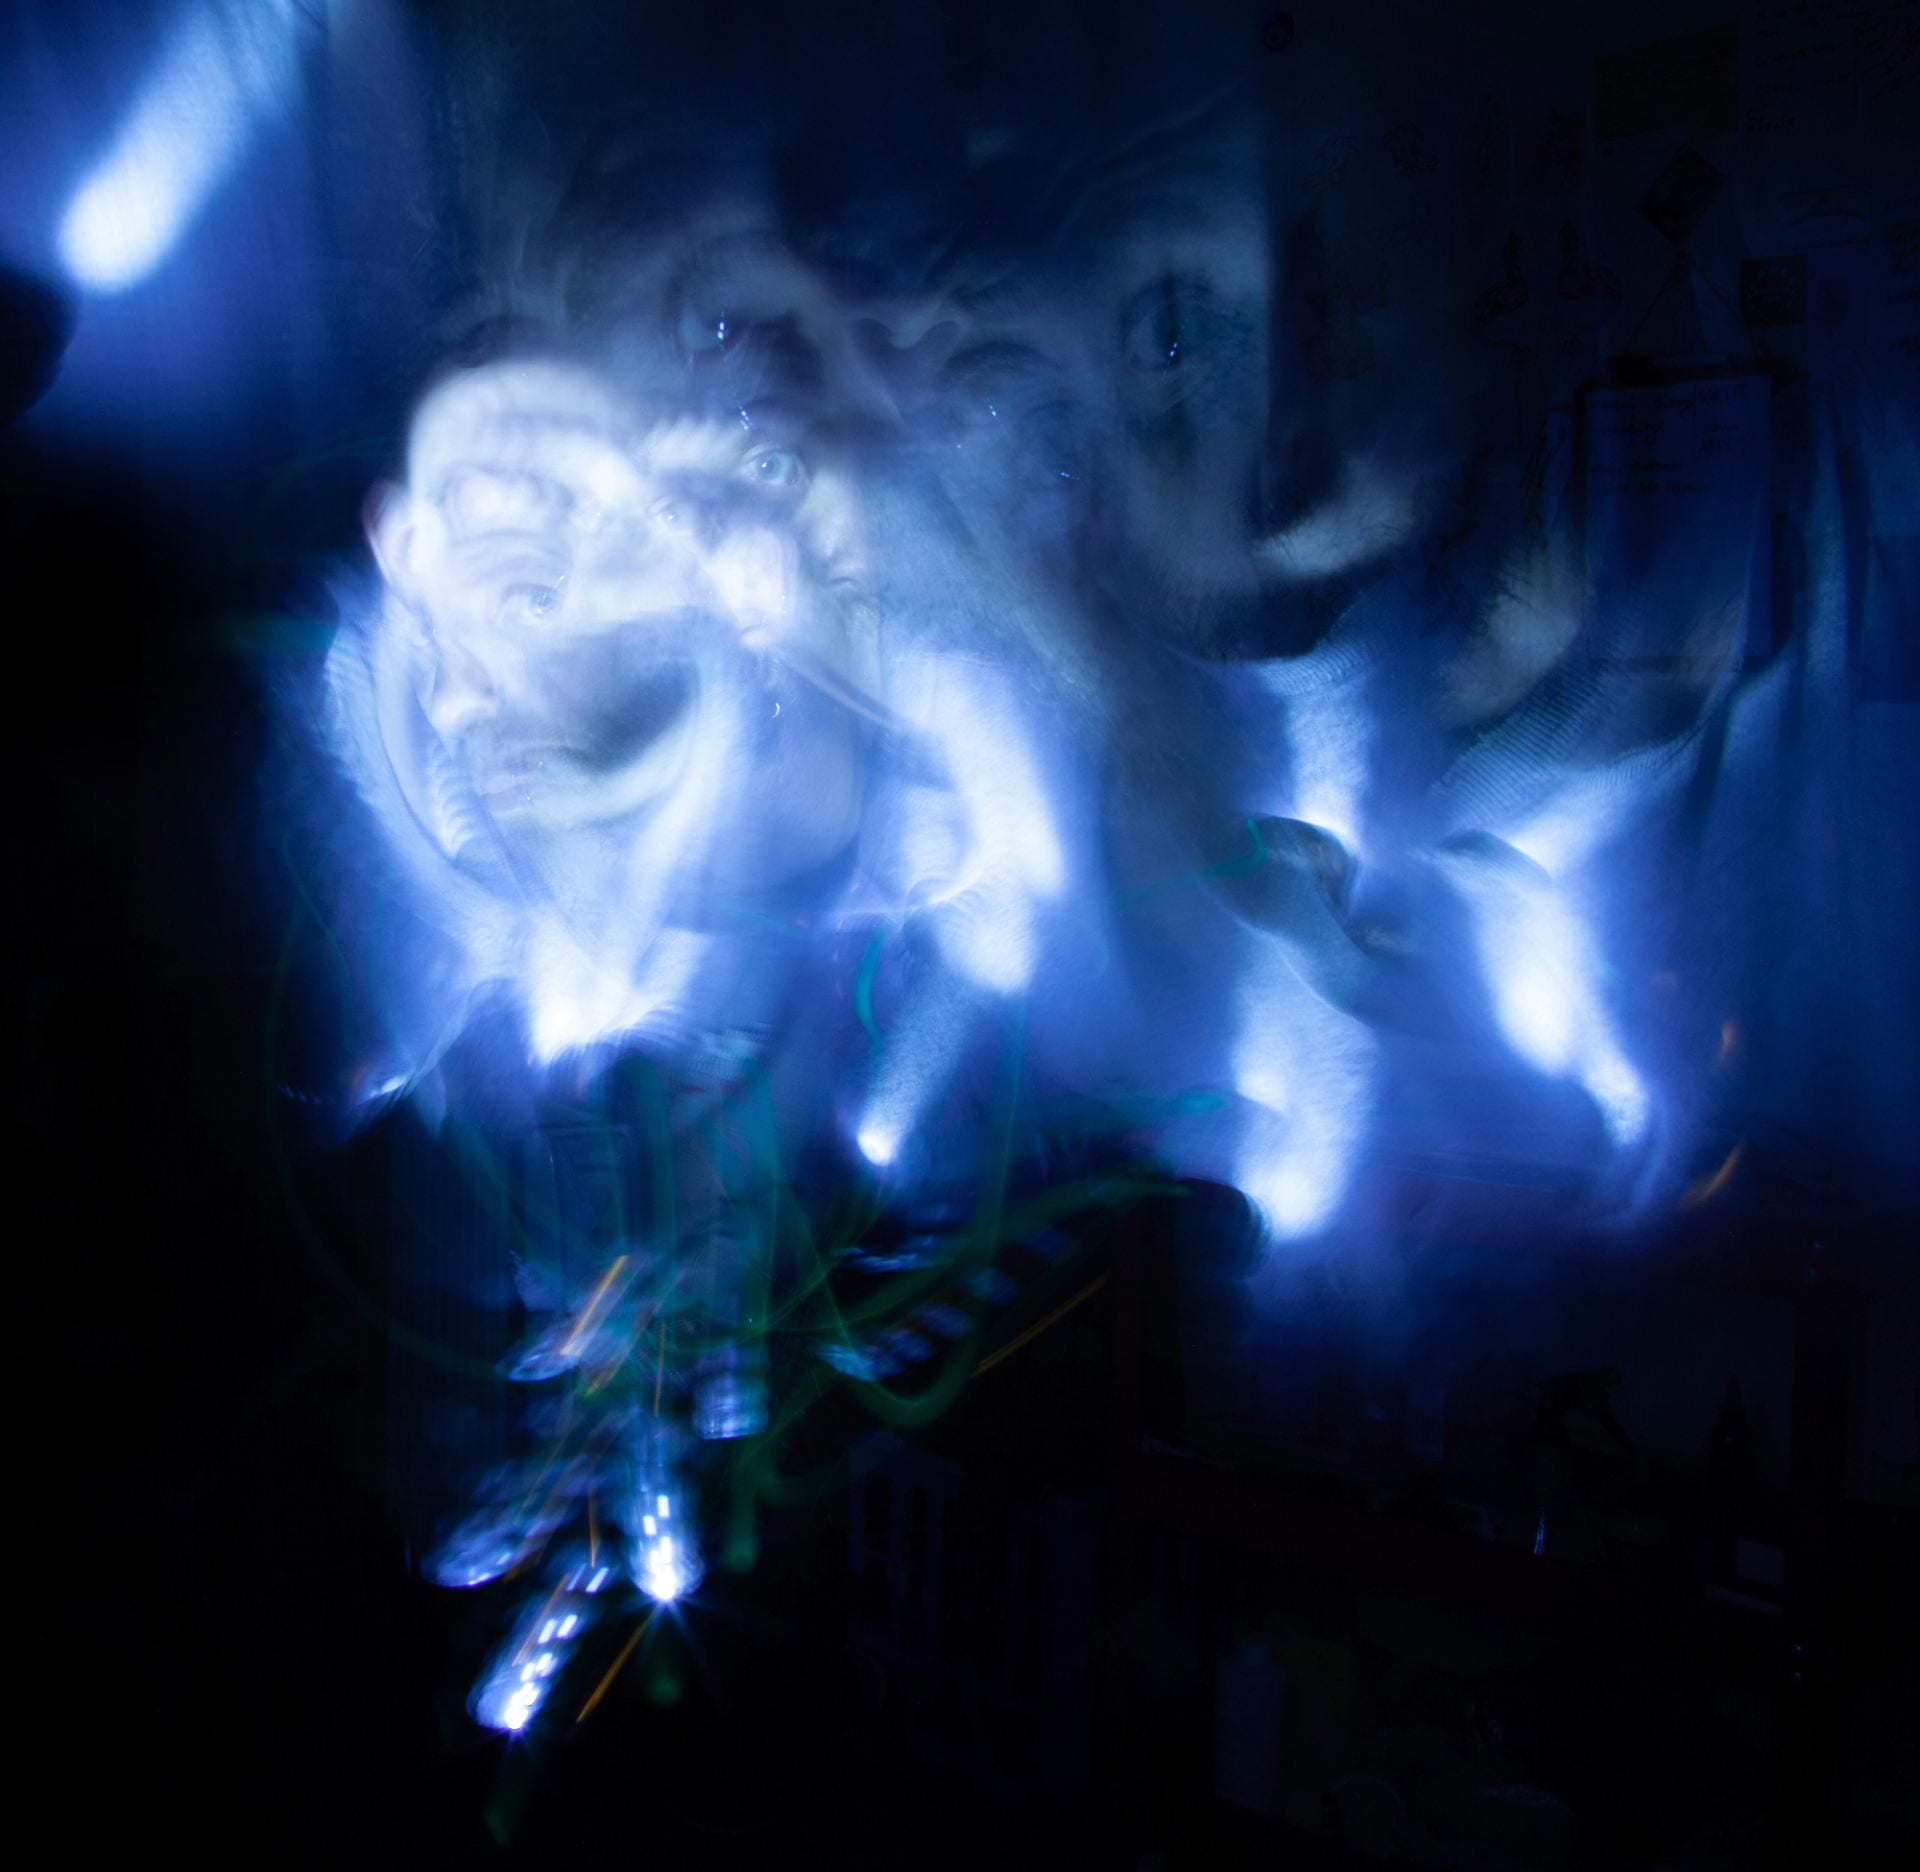 Alexander 'Pug' Williams, Glyphic Psyche, digital long exposure light painting, 2023. Image courtesy of the artist.